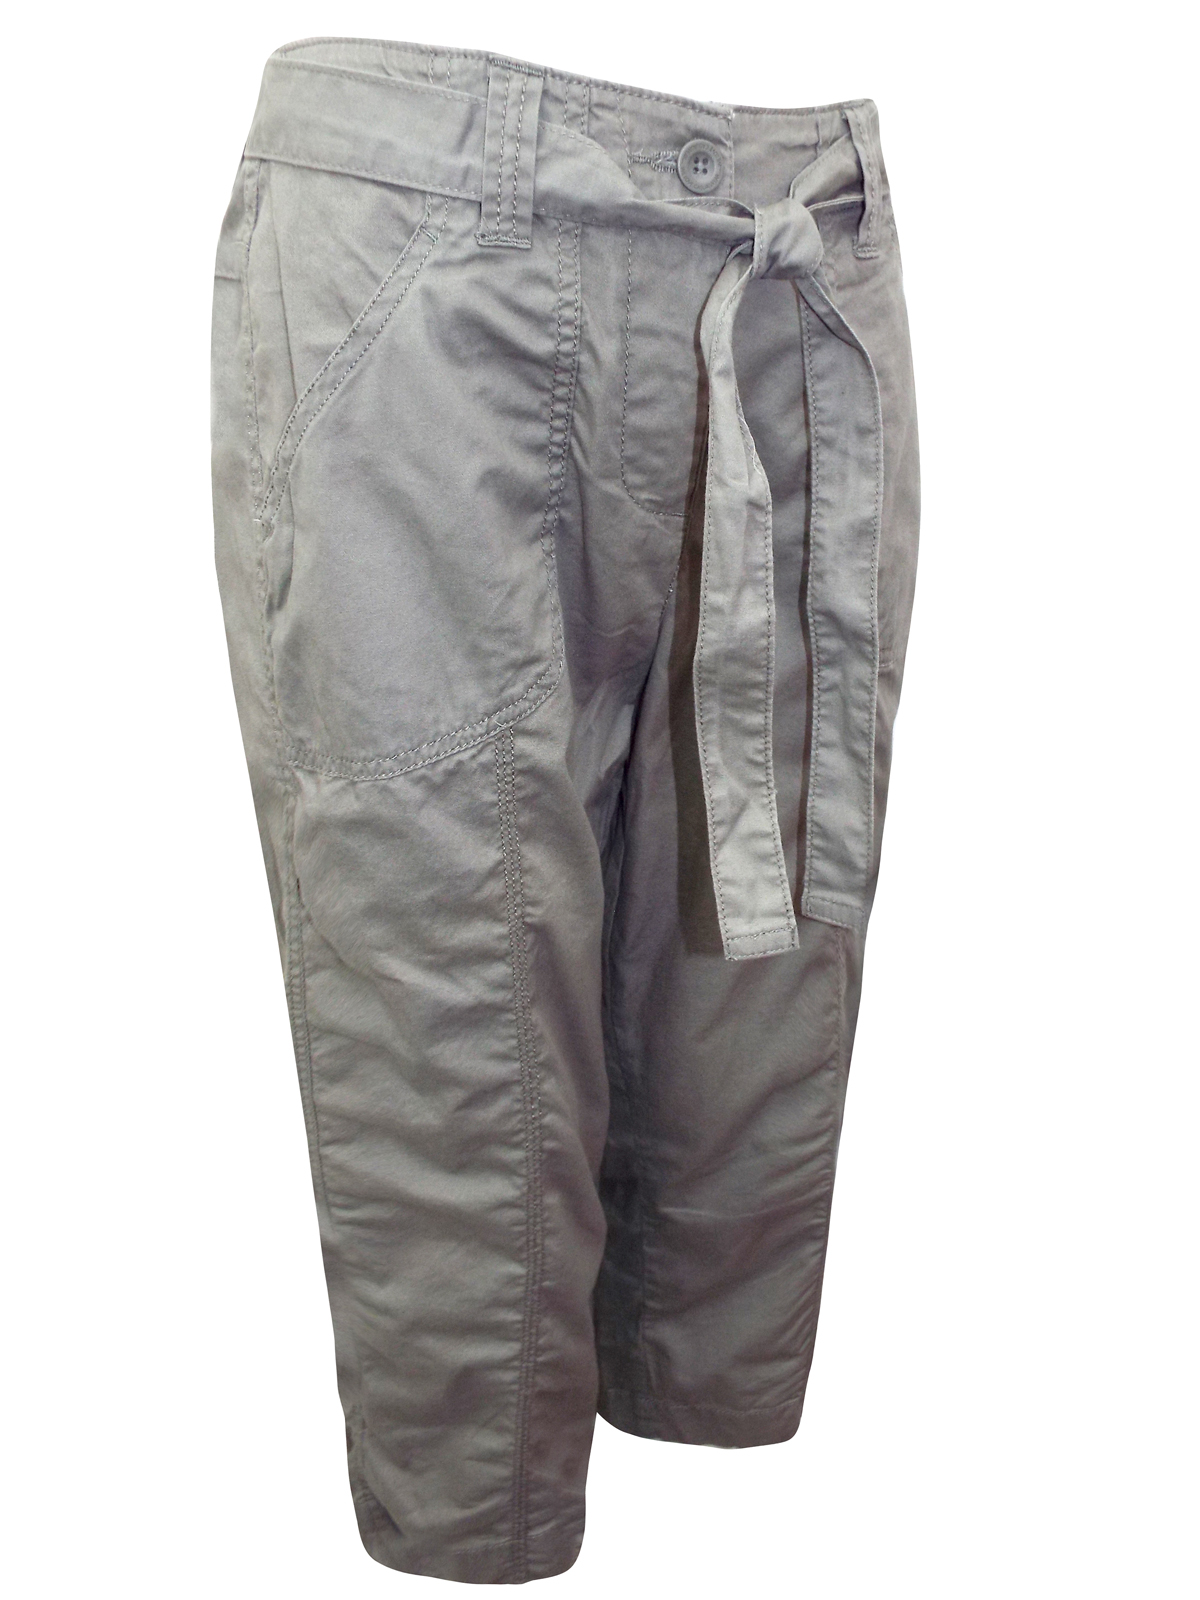 Marks and Spencer - - M&5 KHAKI Belted Cropped Cargo Trousers - Size 12 ...